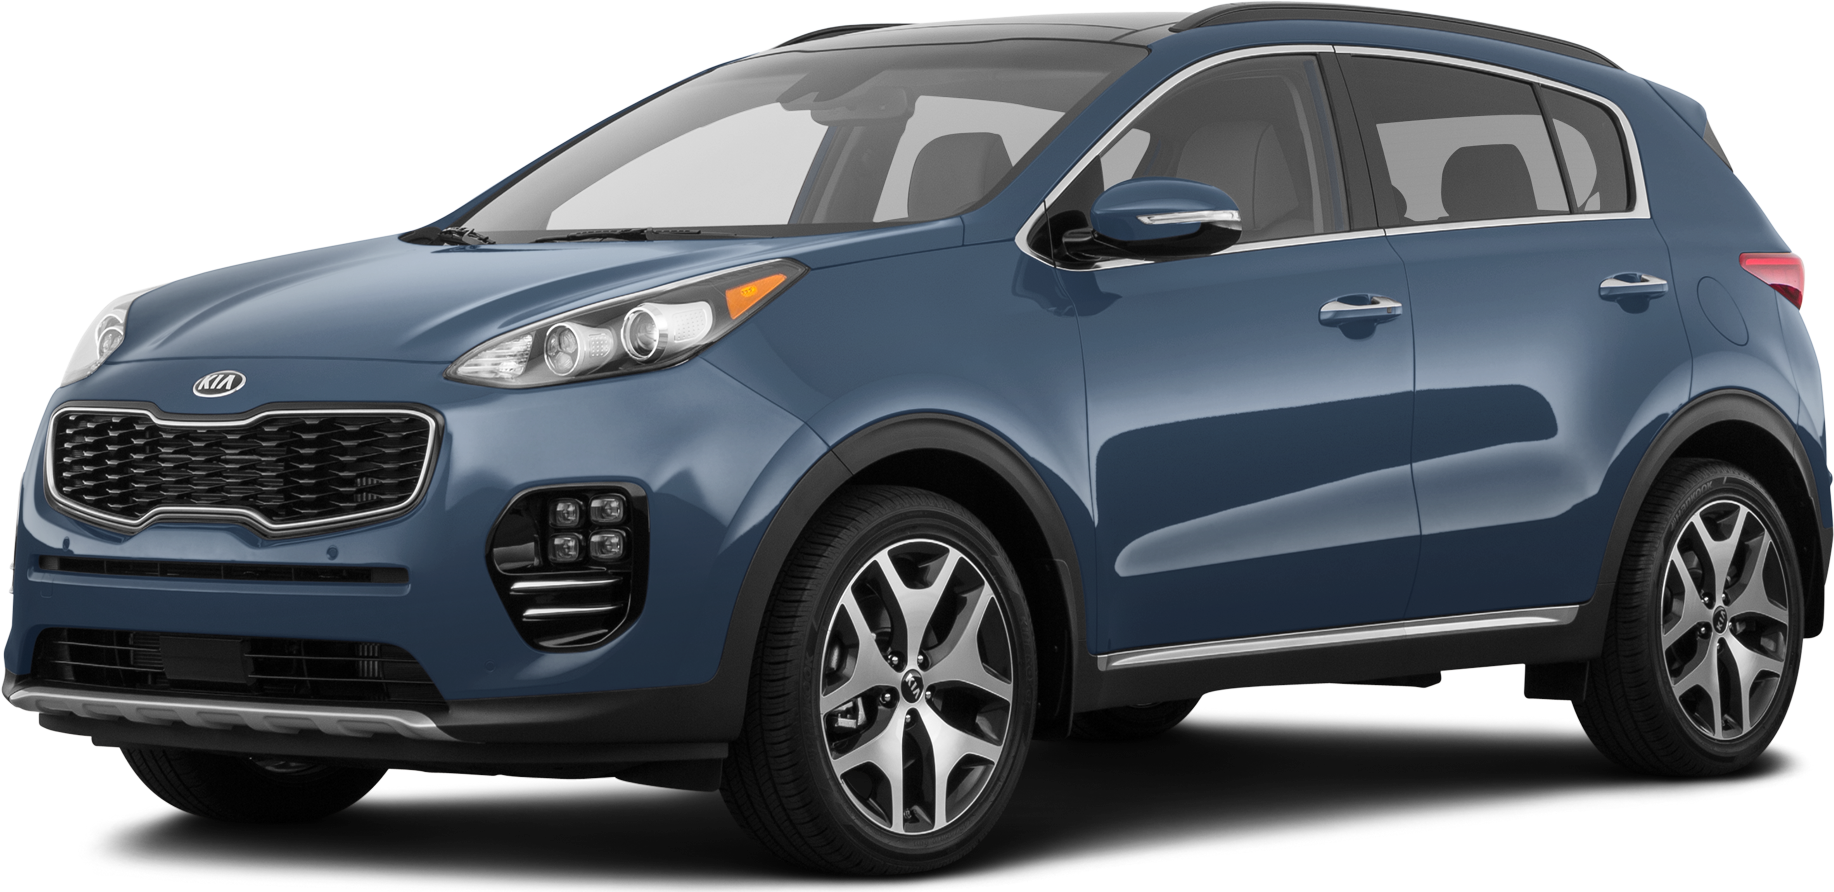 Here's What You Get on a Fully Loaded 2023 Kia Sportage - Kelley Blue Book